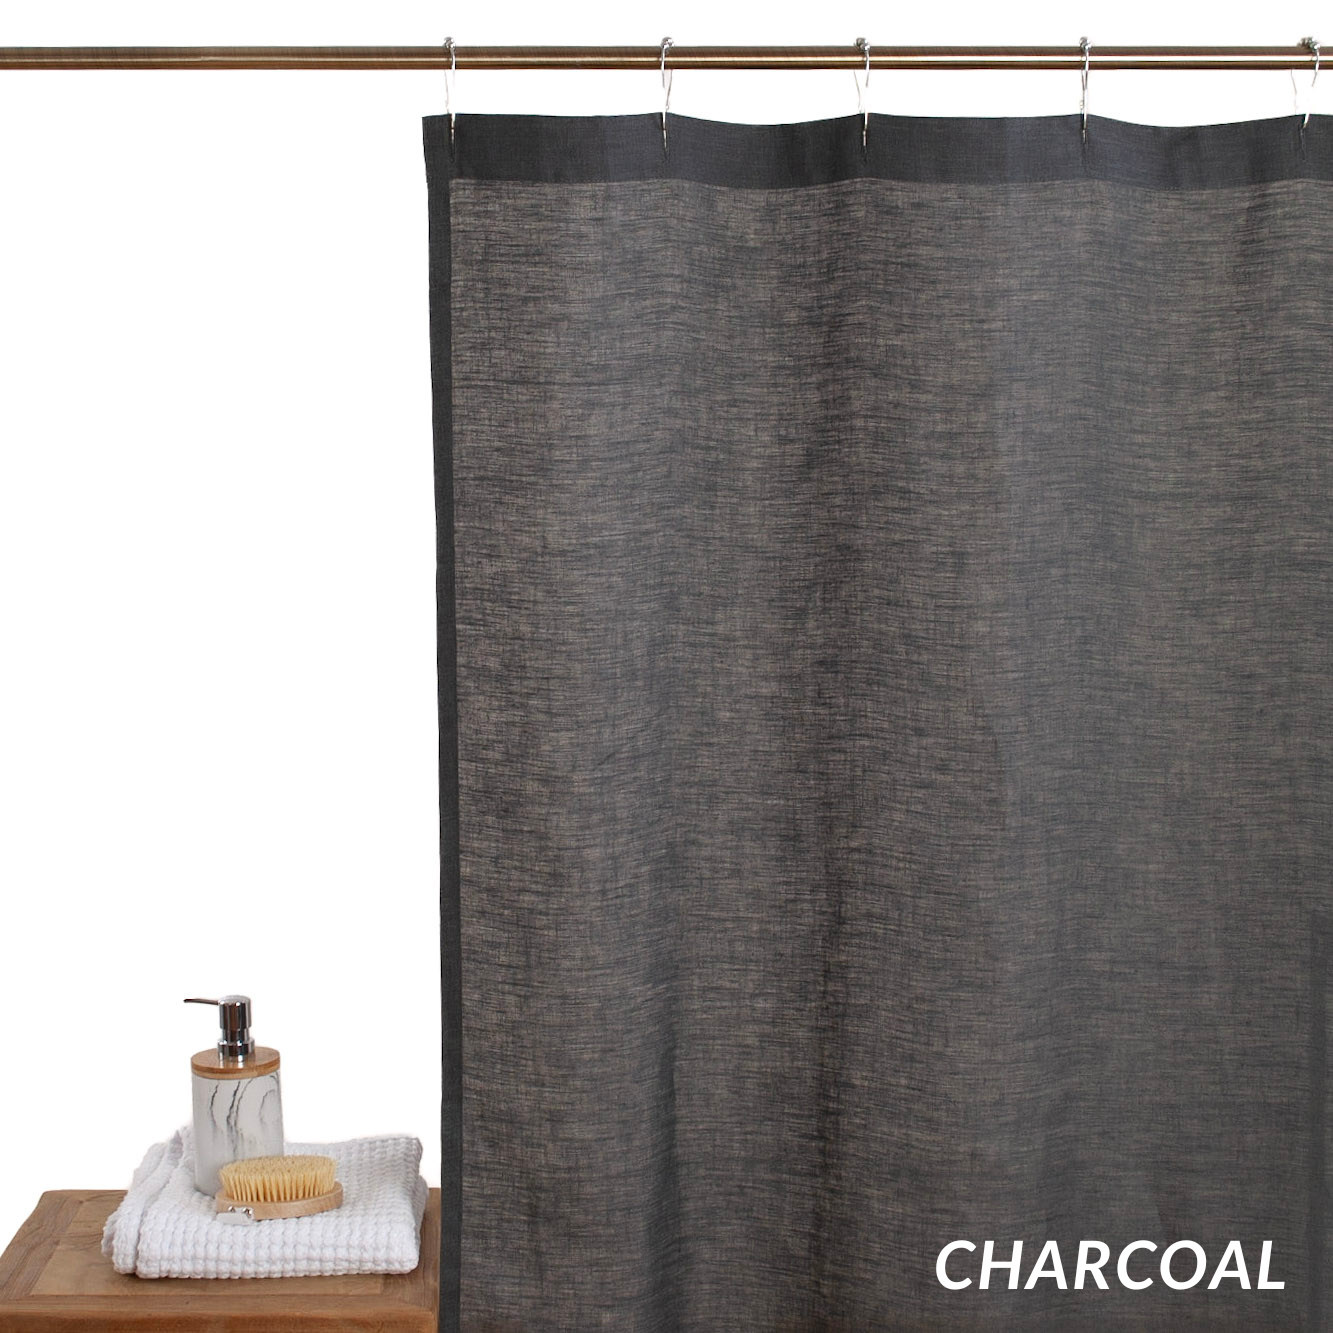 Linen Shower Curtains in Charcoal Color